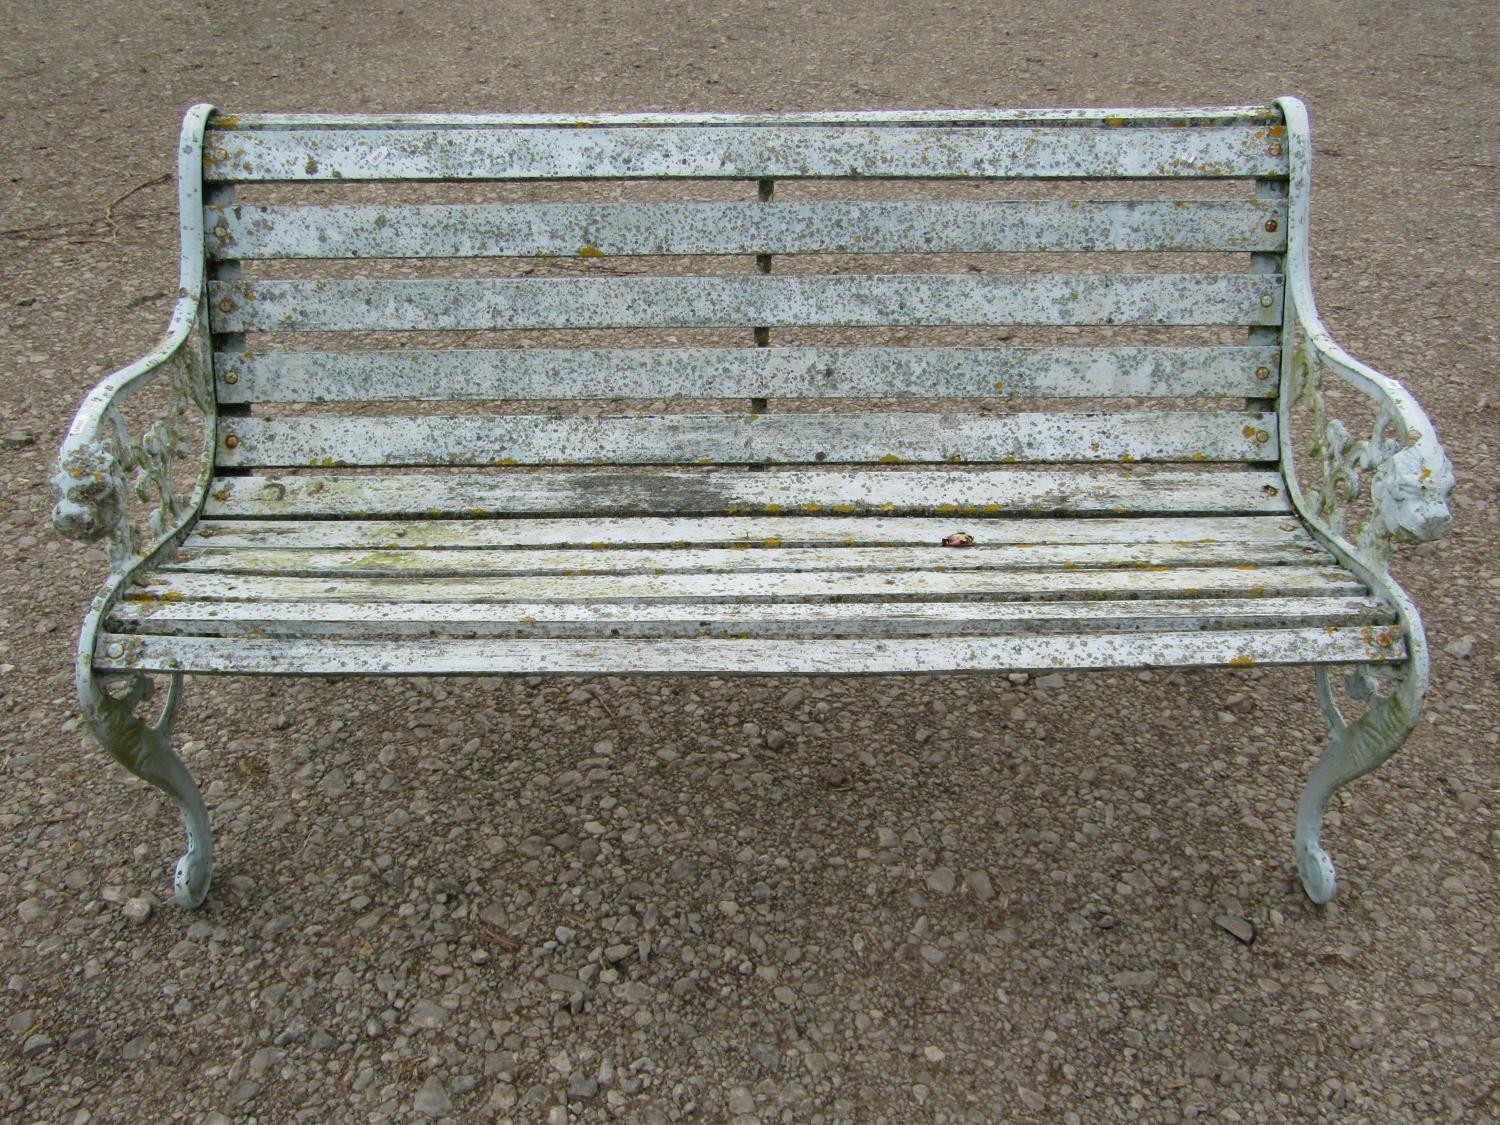 A weathered light blue/cream painted garden bench with slatted seat raised on decorative pierced and